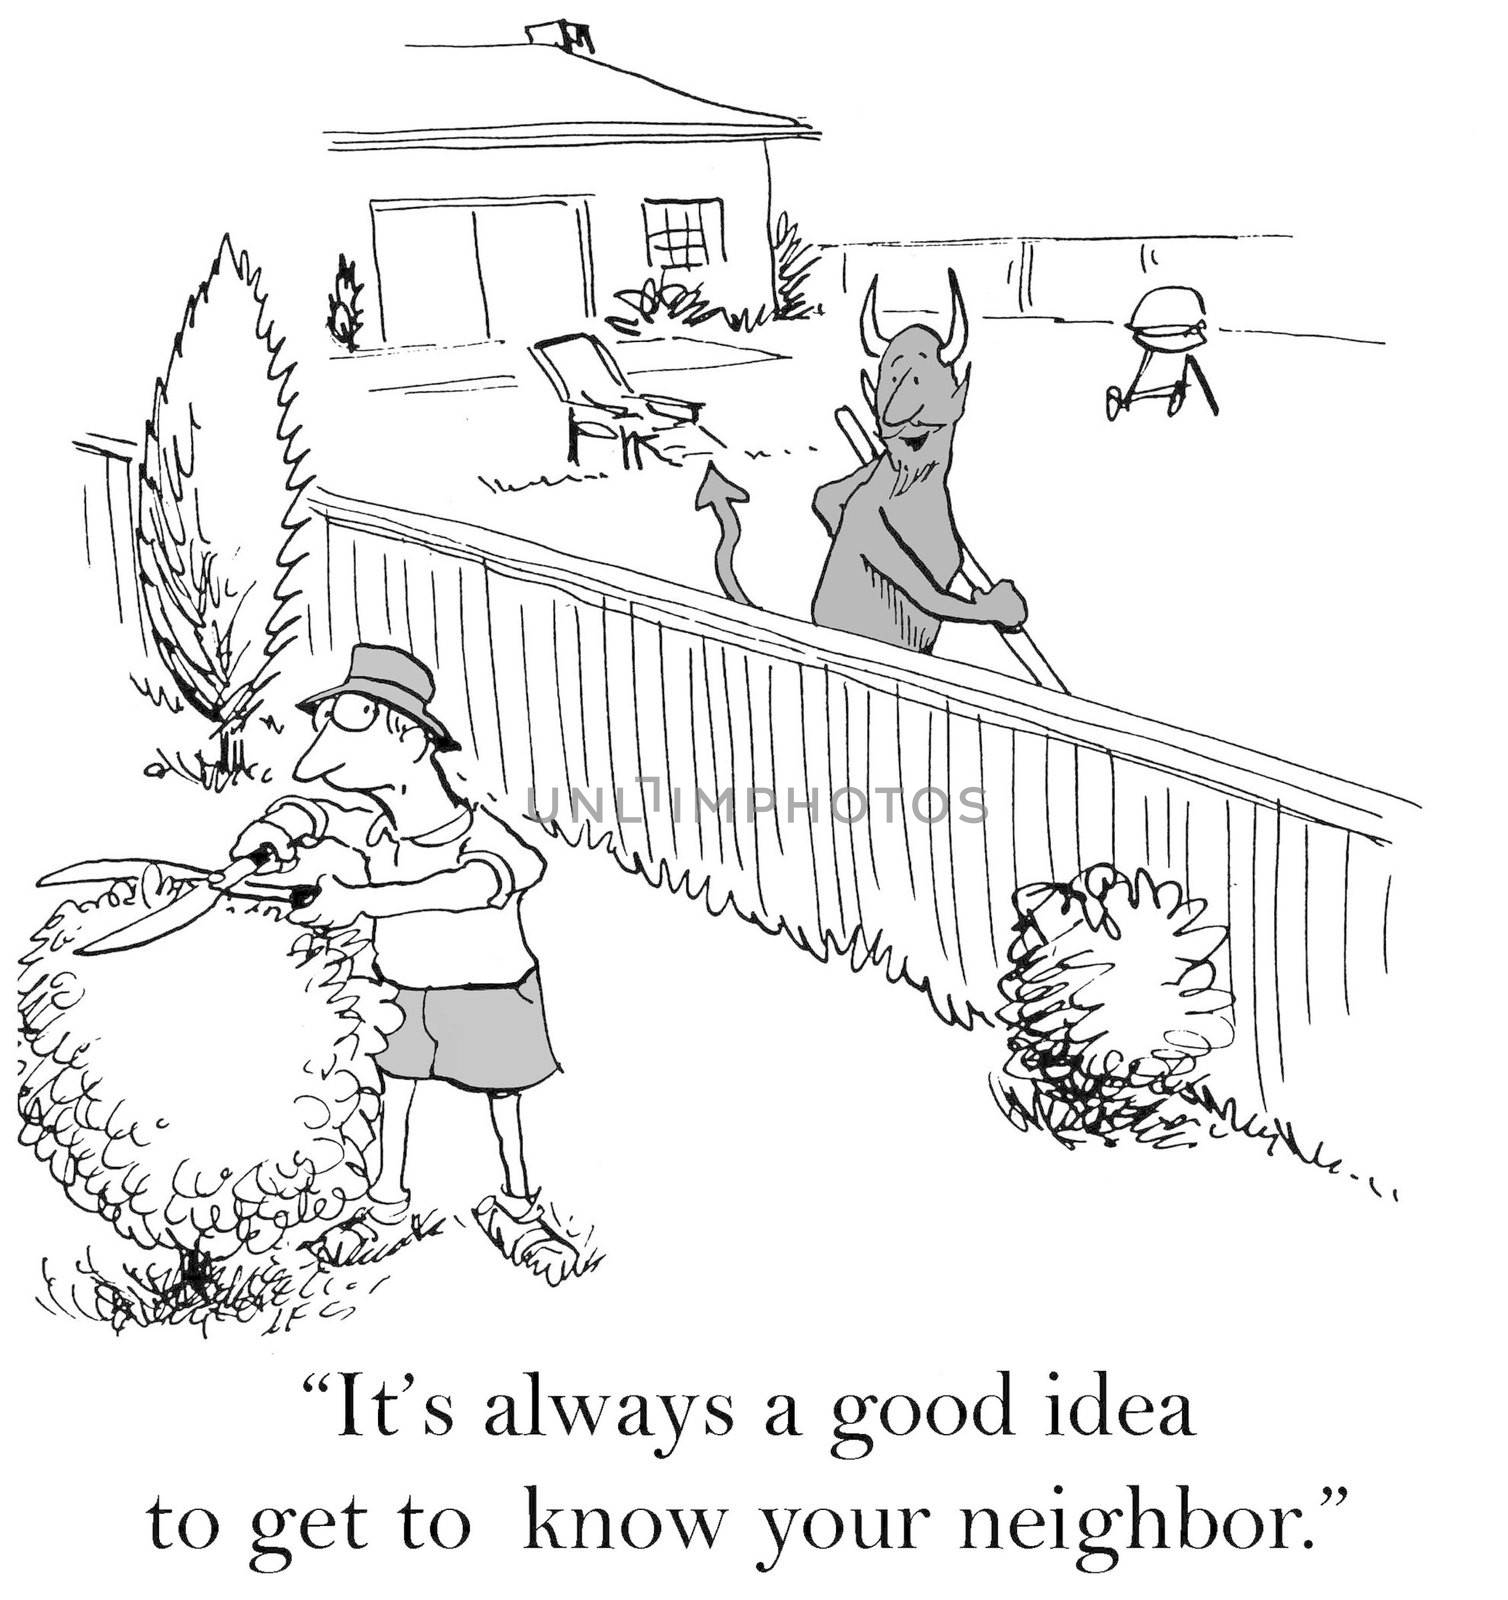 "It's always a good idea to get to know your neighbor."